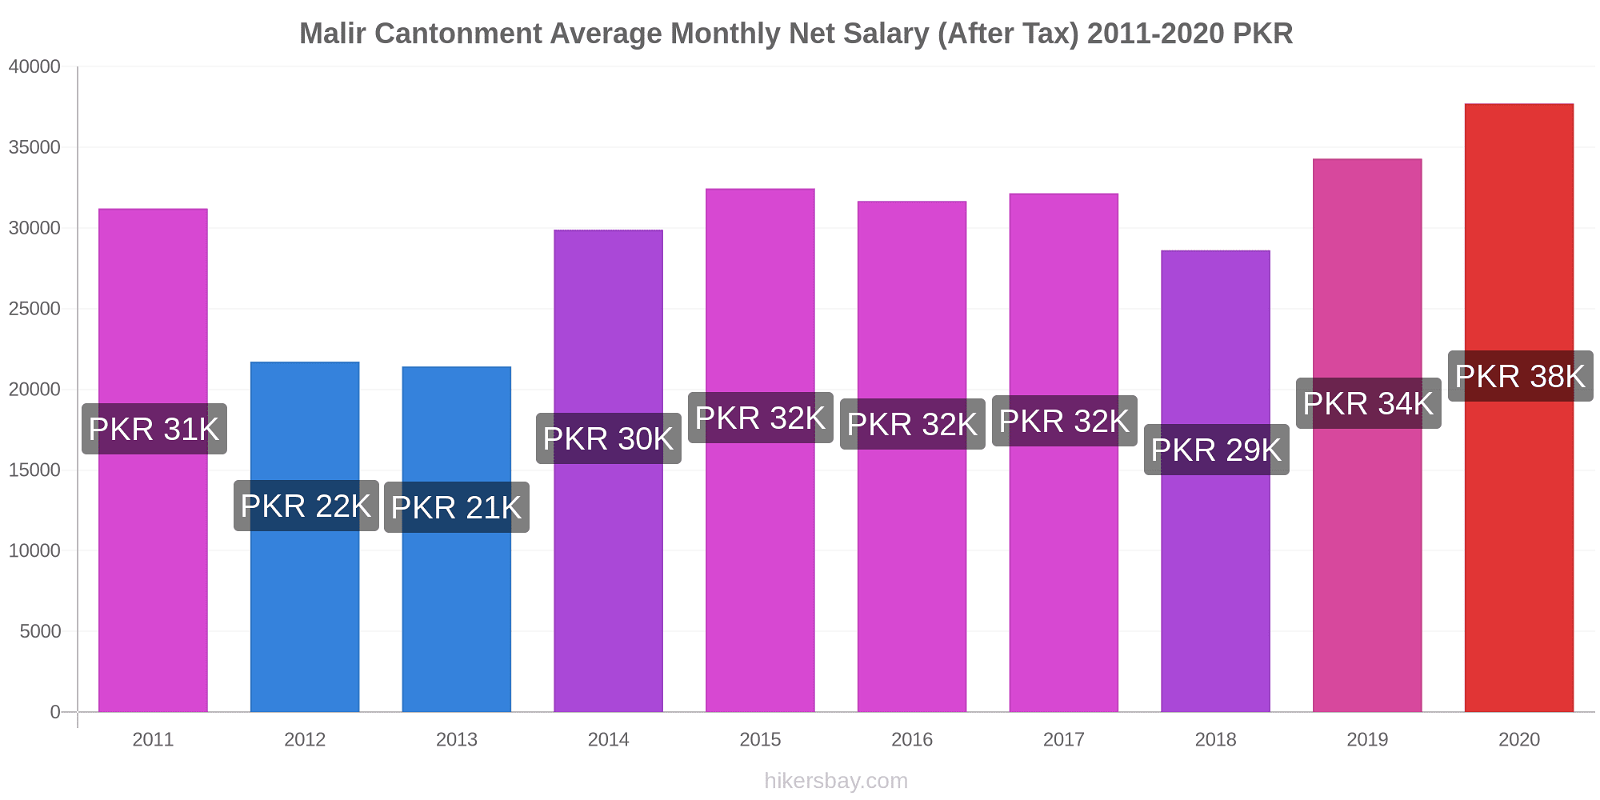 Malir Cantonment price changes Average Monthly Net Salary (After Tax) hikersbay.com